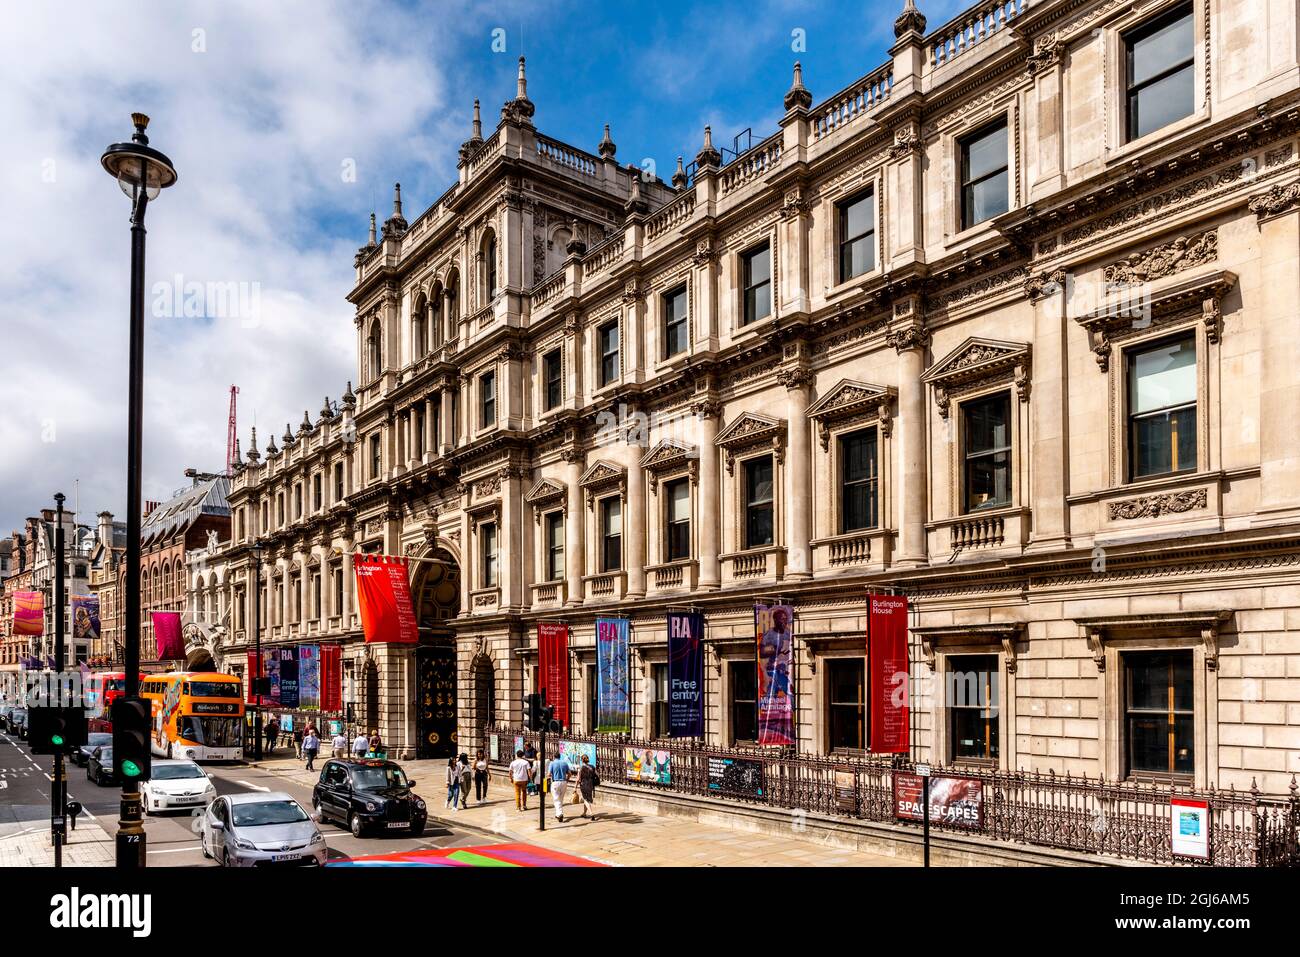 The Royal Academy of Arts, Piccadilly, London, UK. Stock Photo